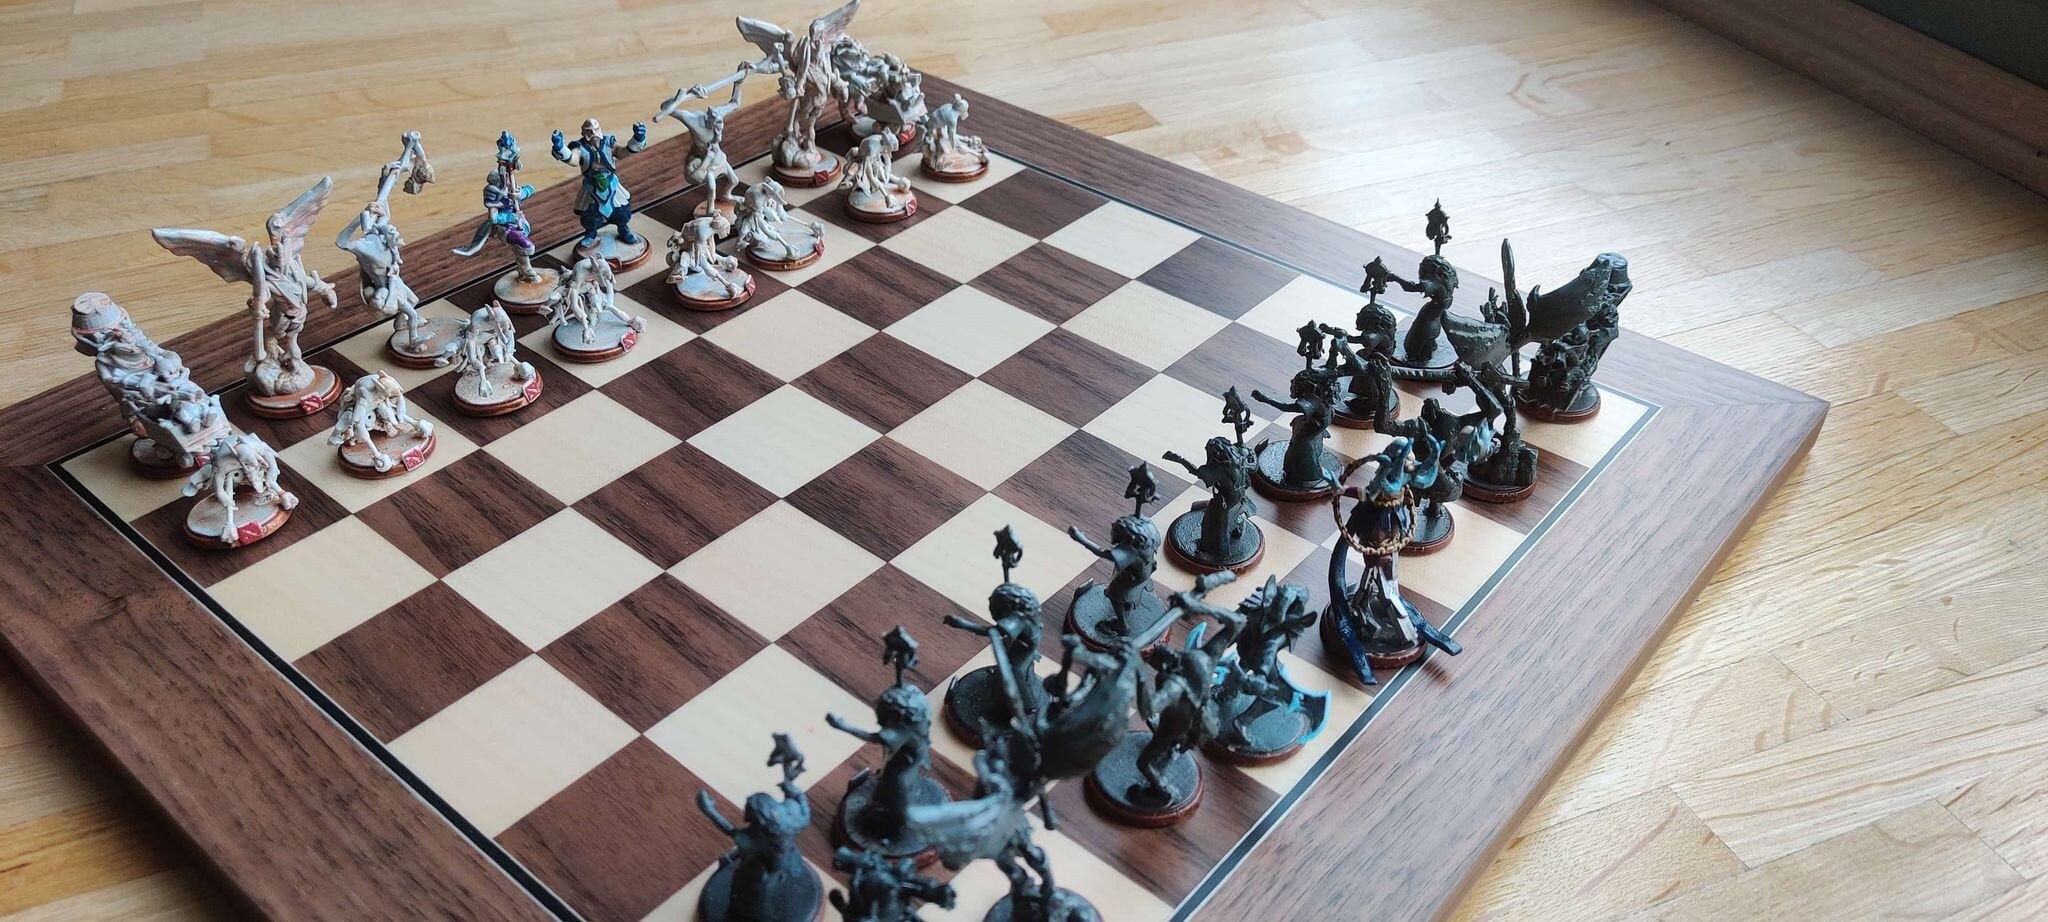 Dota 2 Chess Set With Custom Hero Choices for Each Piece | Etsy UK